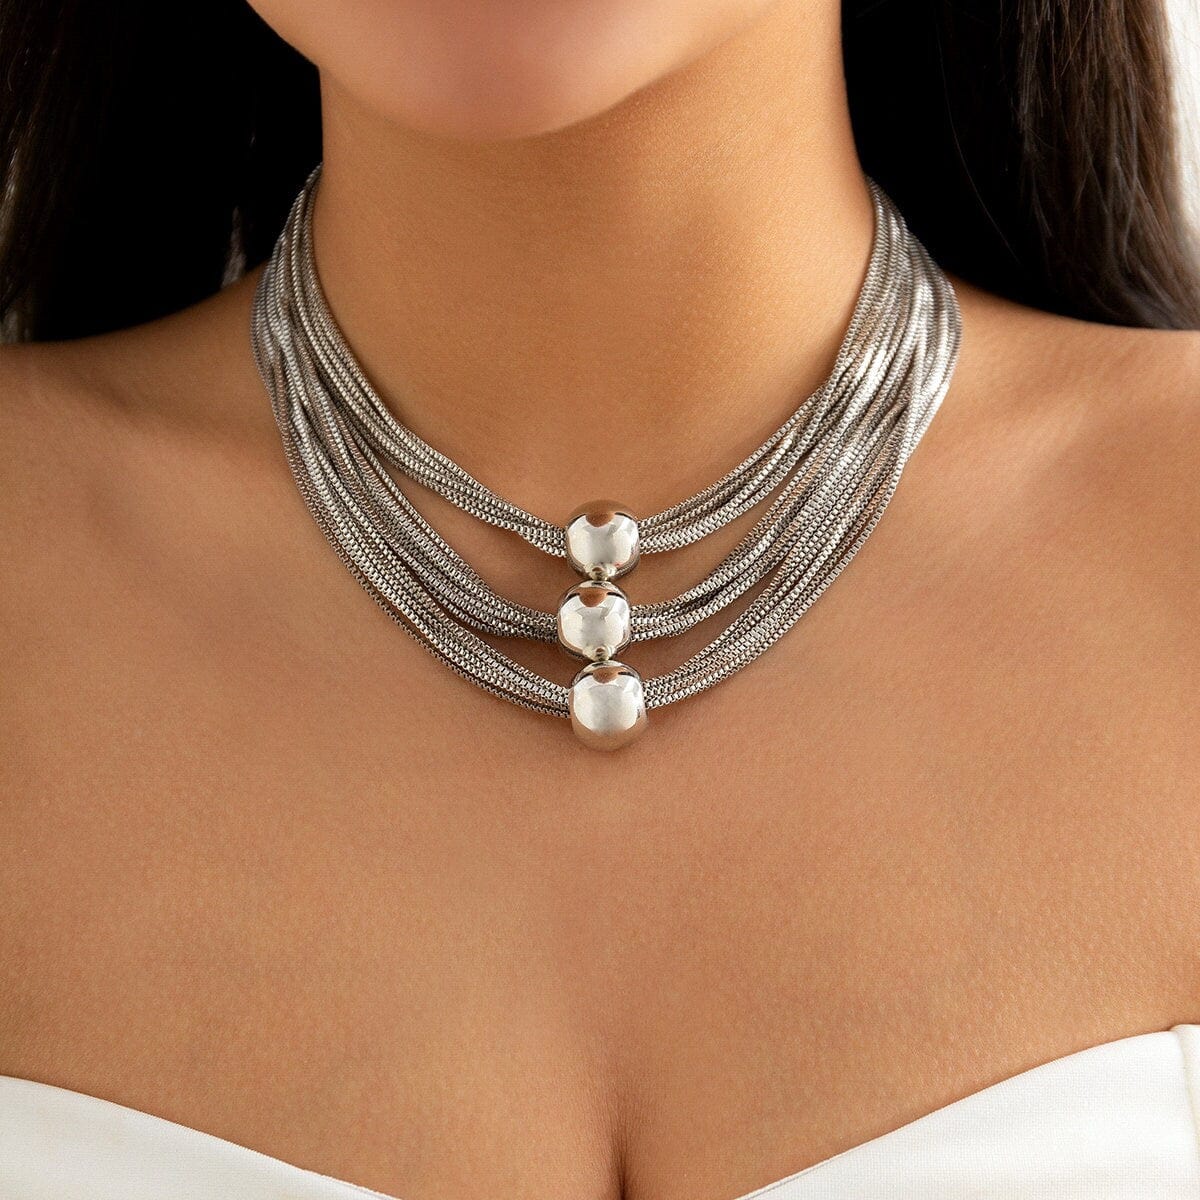 Gothic Printed Chunky Stainless Steel Chain Choker Necklace For Women Short  Clavicle Collar Jewelry From Dh_garden, $2.95 | DHgate.Com